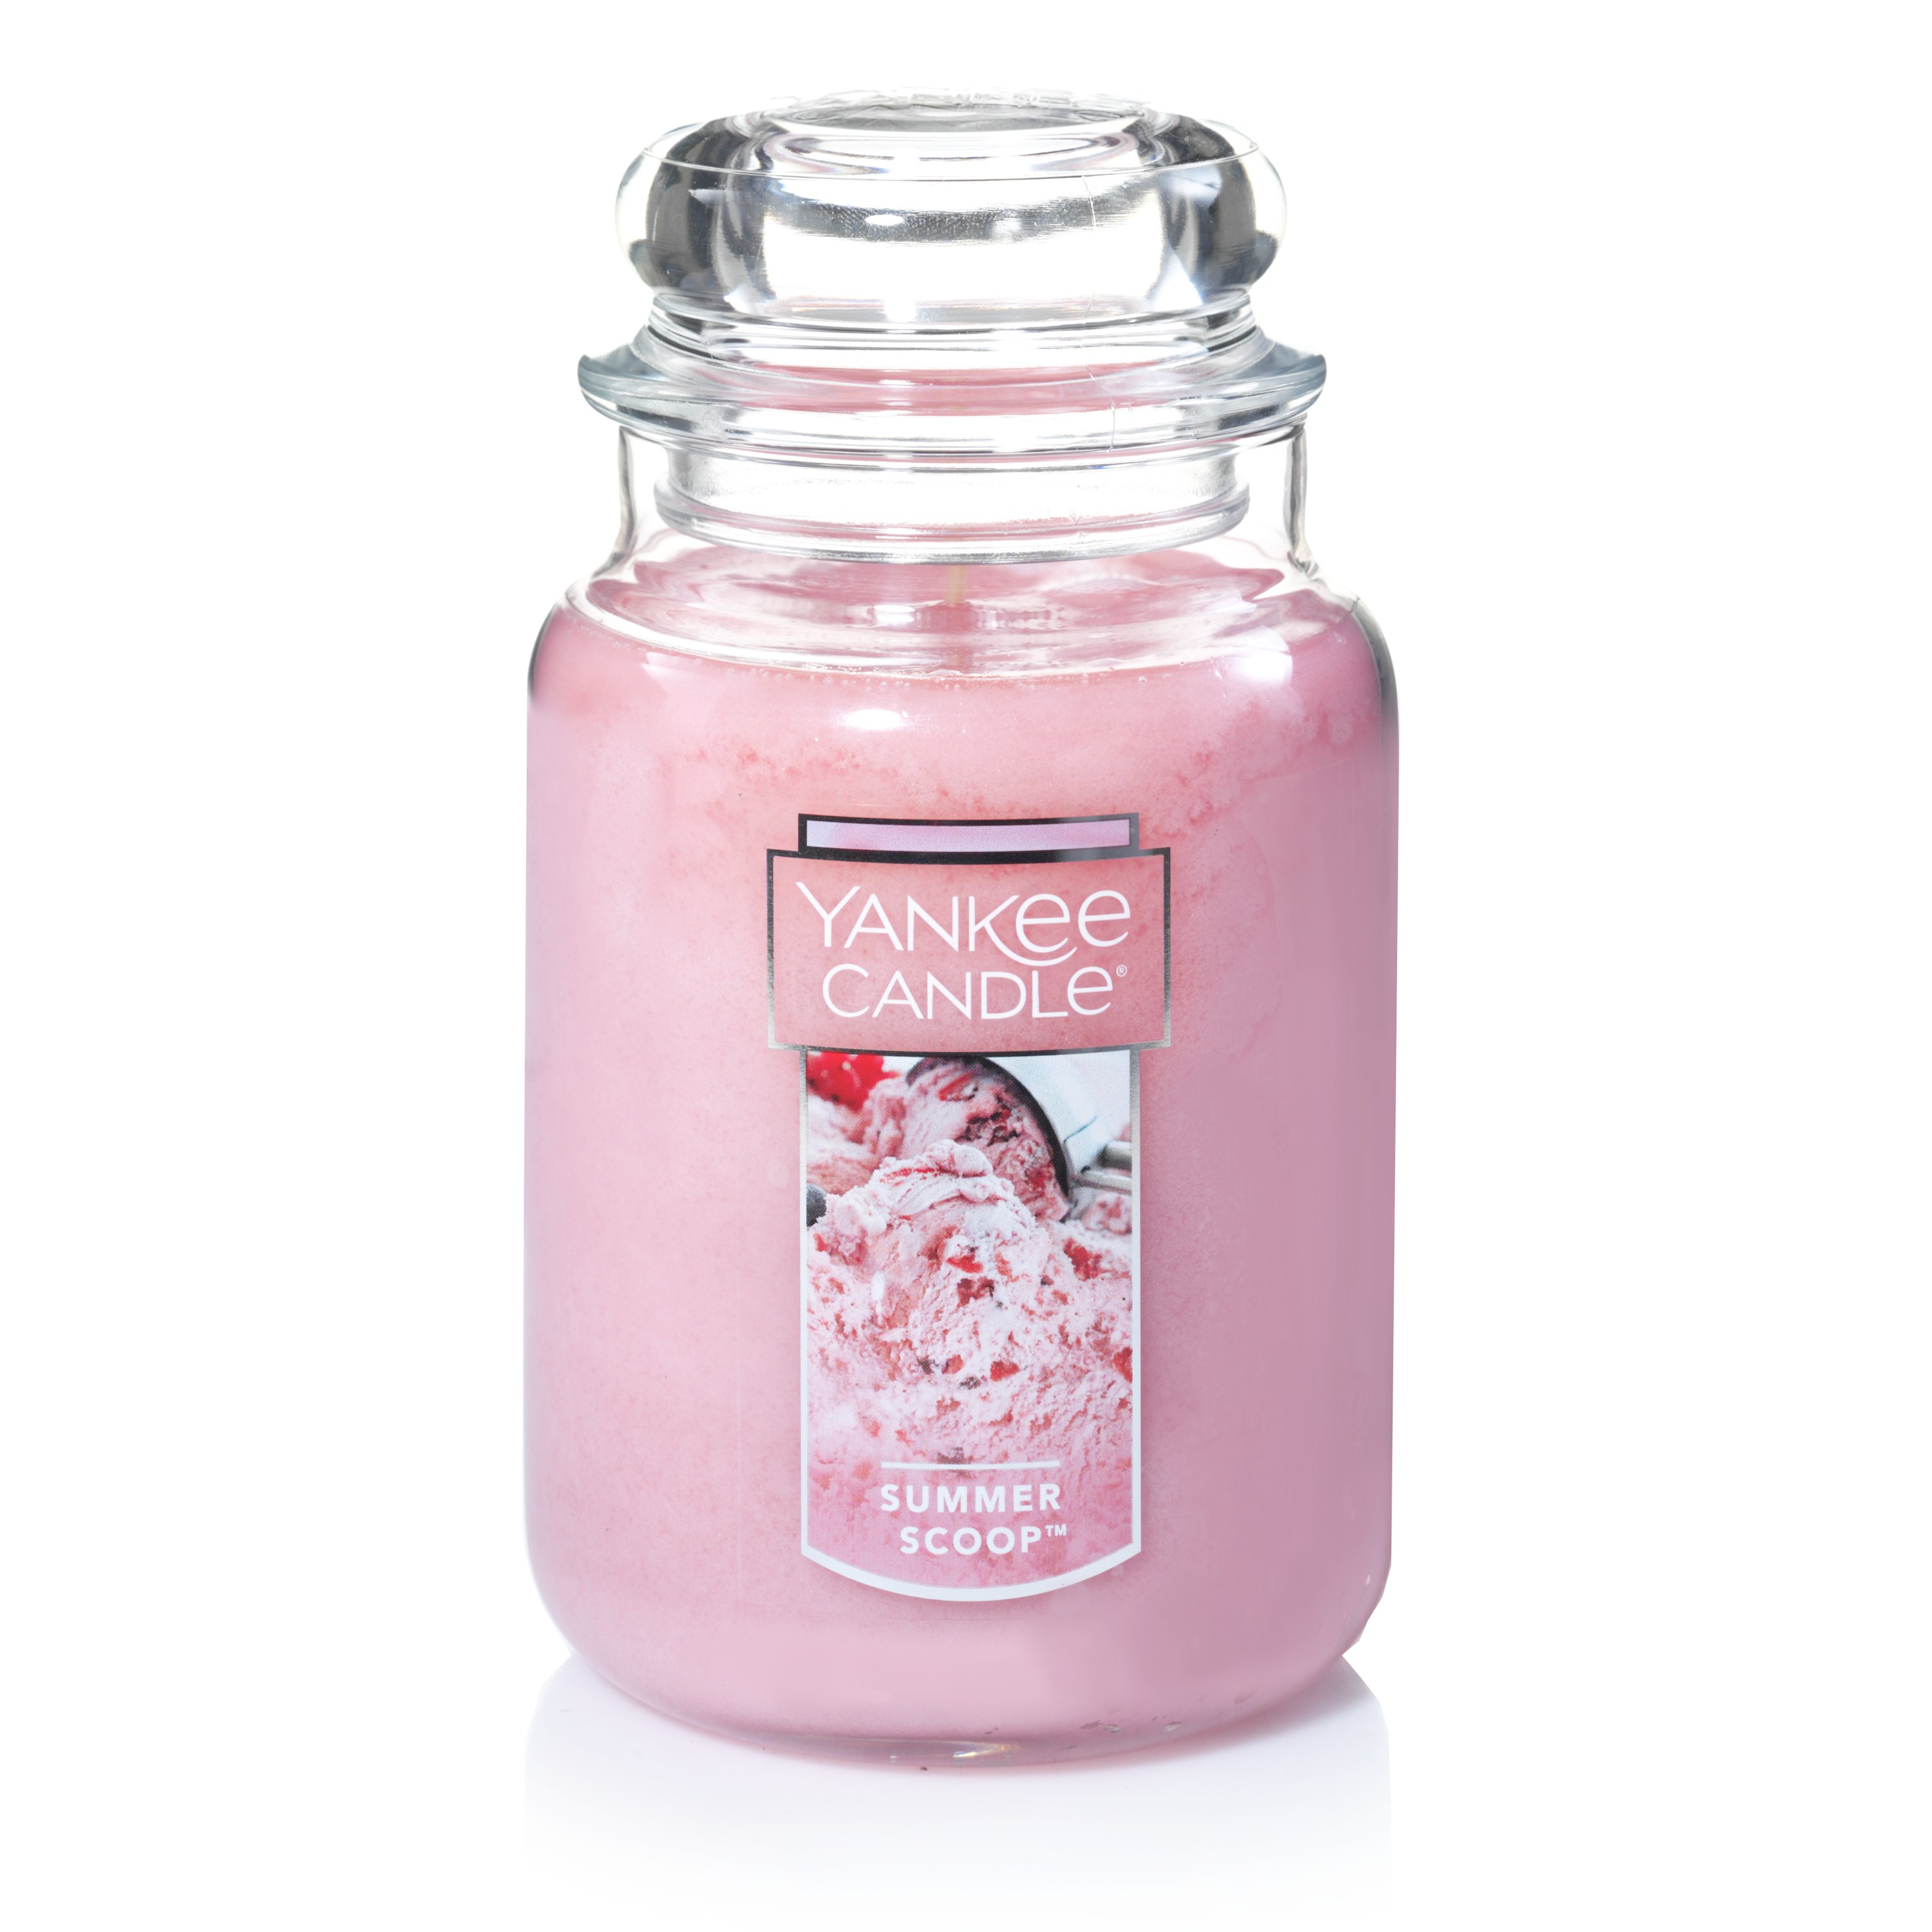 Yankee Candle Large Jar Candle, Summer Scoop